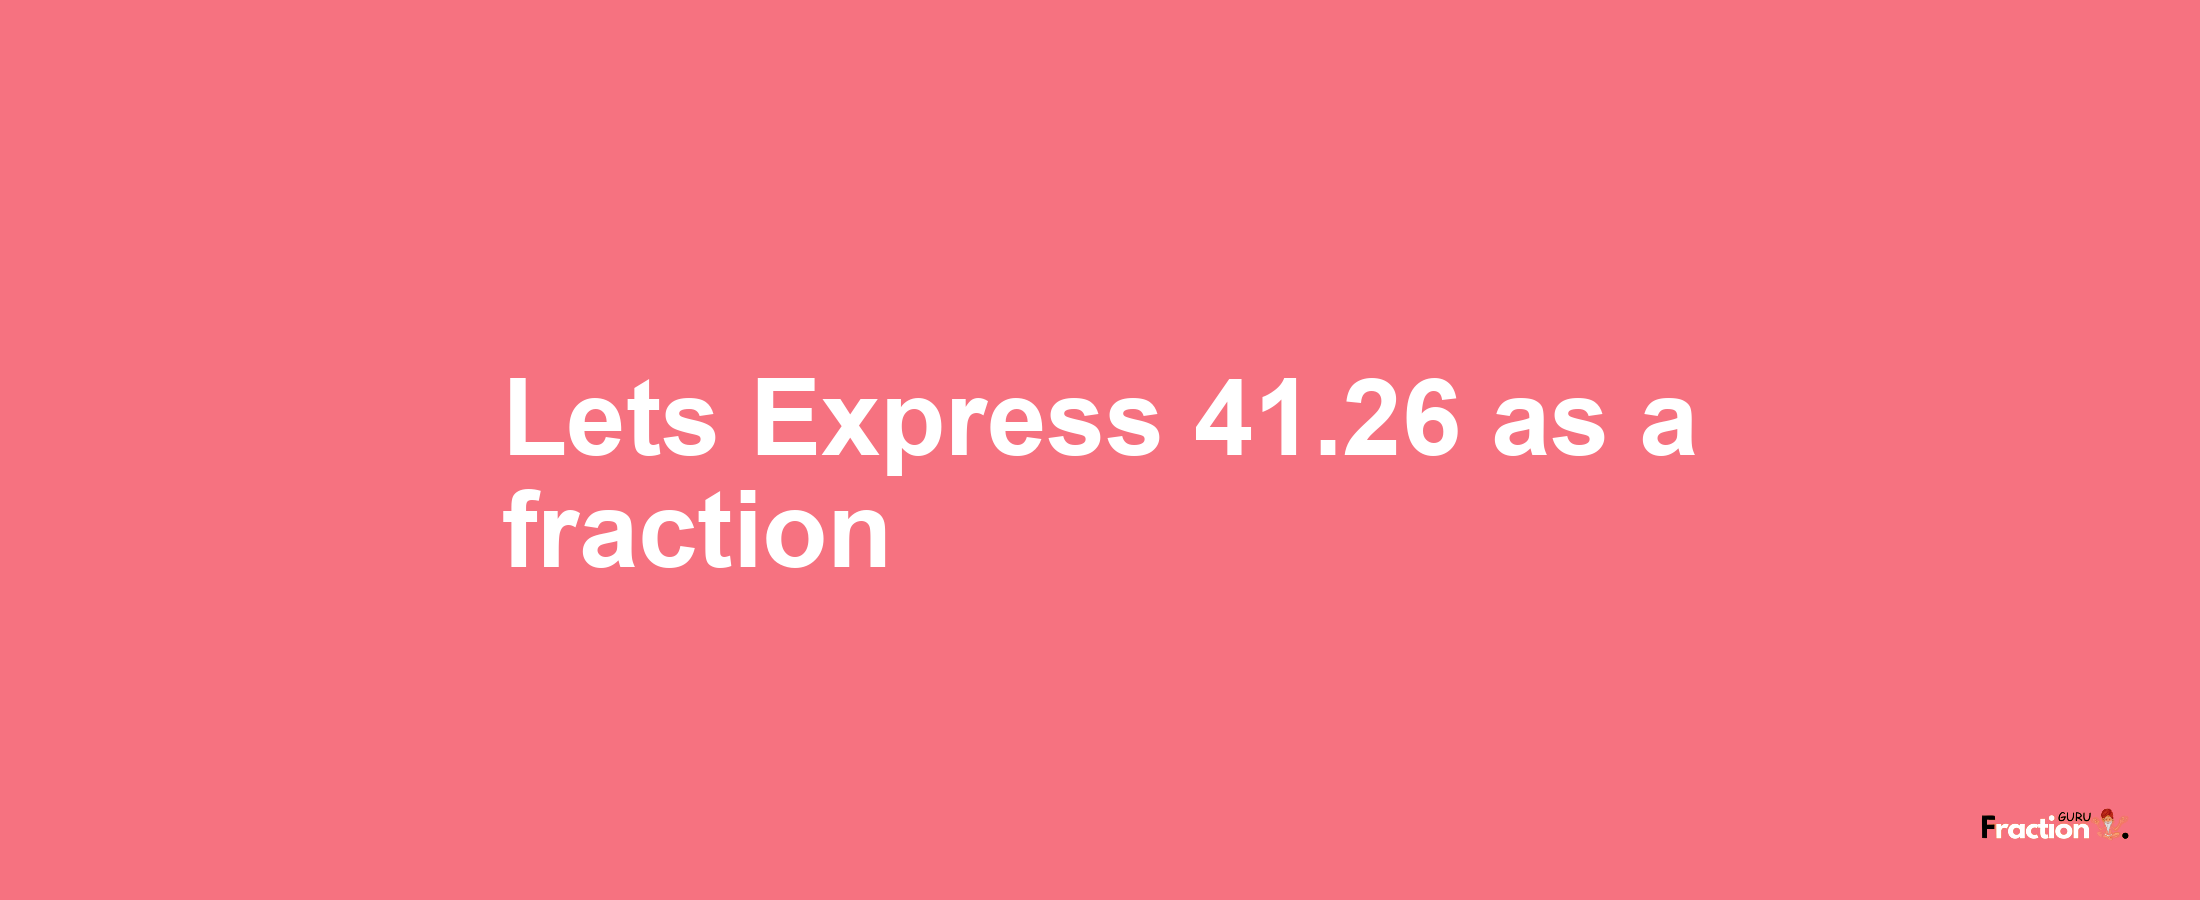 Lets Express 41.26 as afraction